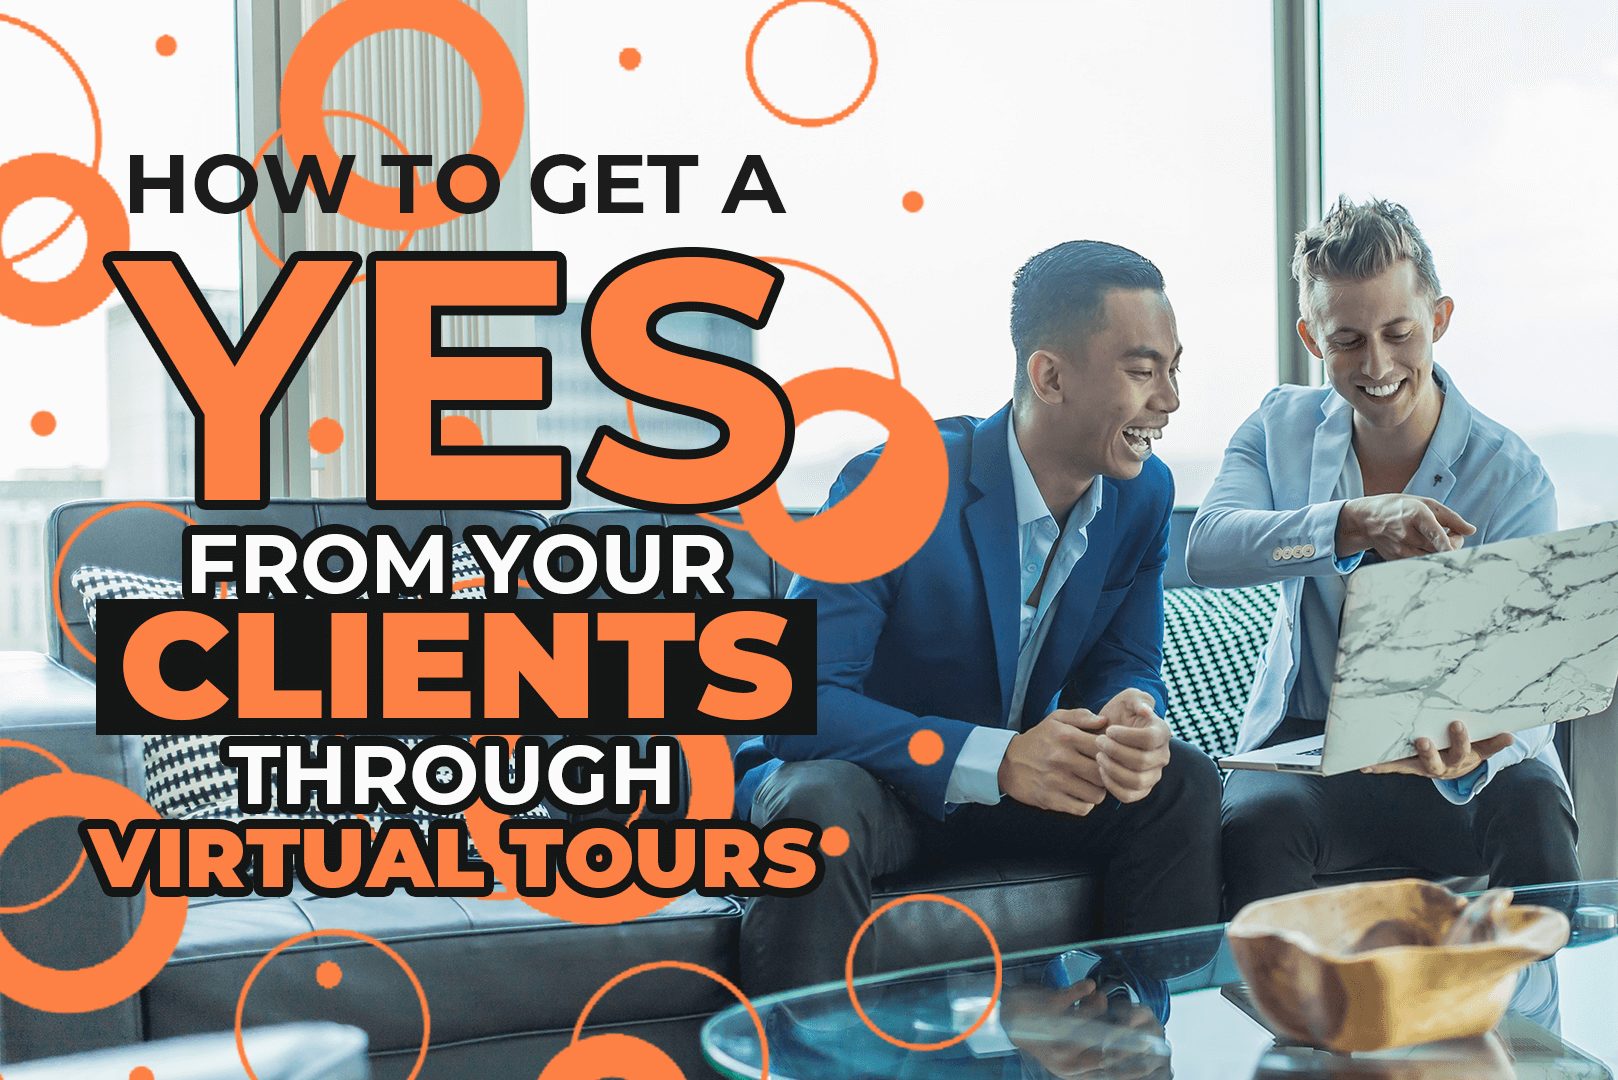 How To Get A Yes From Your Clients Through Virtual Tours